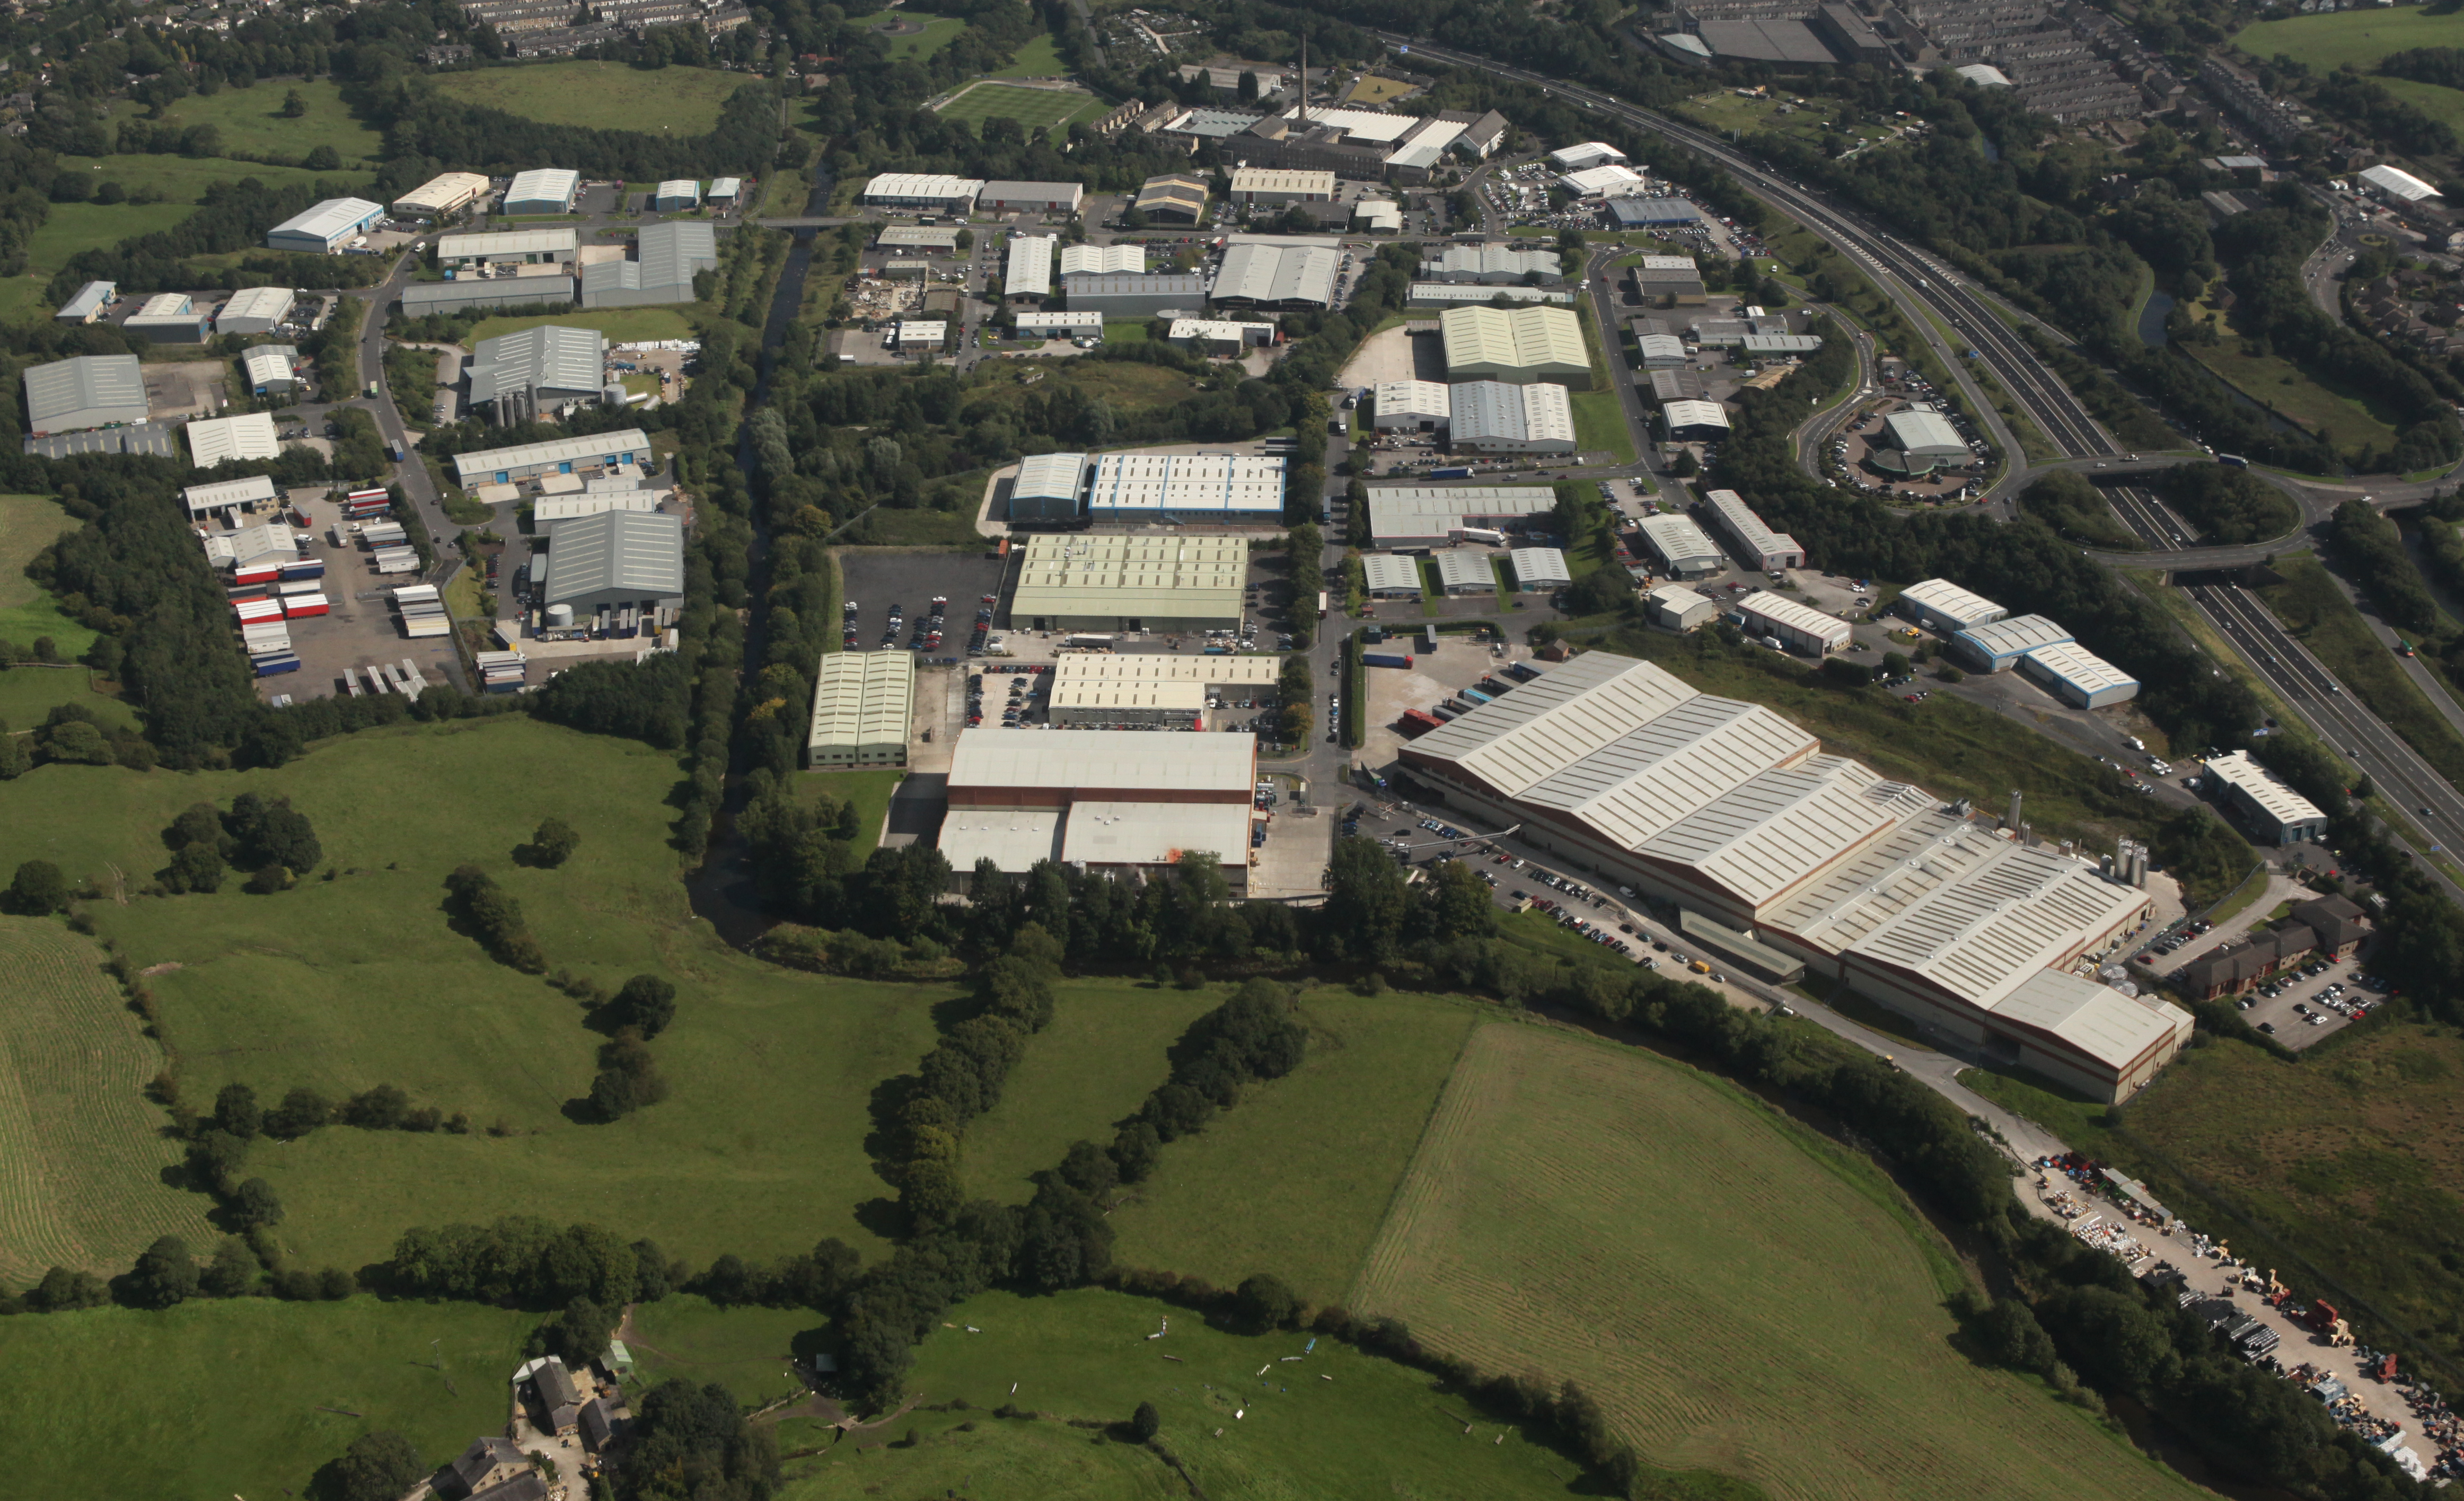 Expansion for Pendle jobs and businesses as Lomeshaye gets go ahead